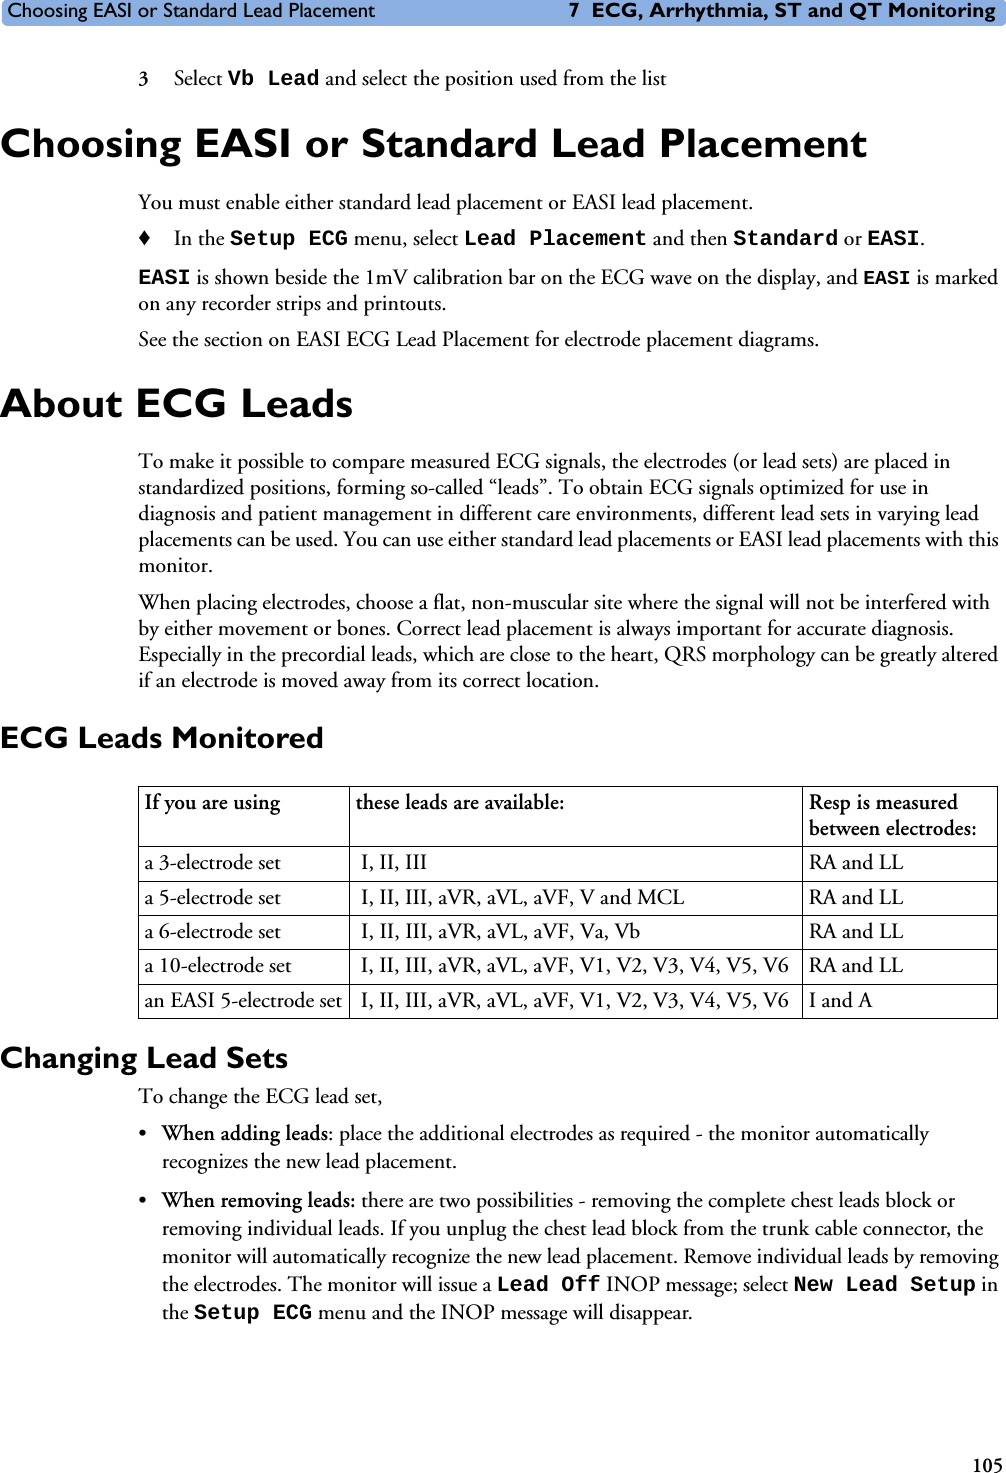 Choosing EASI or Standard Lead Placement 7 ECG, Arrhythmia, ST and QT Monitoring1053Select Vb Lead and select the position used from the listChoosing EASI or Standard Lead PlacementYou must enable either standard lead placement or EASI lead placement. ♦In the Setup ECG menu, select Lead Placement and then Standard or EASI.EASI is shown beside the 1mV calibration bar on the ECG wave on the display, and EASI is marked on any recorder strips and printouts.See the section on EASI ECG Lead Placement for electrode placement diagrams.About ECG LeadsTo make it possible to compare measured ECG signals, the electrodes (or lead sets) are placed in standardized positions, forming so-called “leads”. To obtain ECG signals optimized for use in diagnosis and patient management in different care environments, different lead sets in varying lead placements can be used. You can use either standard lead placements or EASI lead placements with this monitor.When placing electrodes, choose a flat, non-muscular site where the signal will not be interfered with by either movement or bones. Correct lead placement is always important for accurate diagnosis. Especially in the precordial leads, which are close to the heart, QRS morphology can be greatly altered if an electrode is moved away from its correct location.ECG Leads MonitoredChanging Lead Sets To change the ECG lead set, •When adding leads: place the additional electrodes as required - the monitor automatically recognizes the new lead placement.•When removing leads: there are two possibilities - removing the complete chest leads block or removing individual leads. If you unplug the chest lead block from the trunk cable connector, the monitor will automatically recognize the new lead placement. Remove individual leads by removing the electrodes. The monitor will issue a Lead Off INOP message; select New Lead Setup in the Setup ECG menu and the INOP message will disappear. If you are using  these leads are available:  Resp is measured between electrodes:a 3-electrode set  I, II, III RA and LLa 5-electrode set  I, II, III, aVR, aVL, aVF, V and MCL RA and LLa 6-electrode set  I, II, III, aVR, aVL, aVF, Va, Vb RA and LLa 10-electrode set  I, II, III, aVR, aVL, aVF, V1, V2, V3, V4, V5, V6 RA and LLan EASI 5-electrode set  I, II, III, aVR, aVL, aVF, V1, V2, V3, V4, V5, V6 I and A